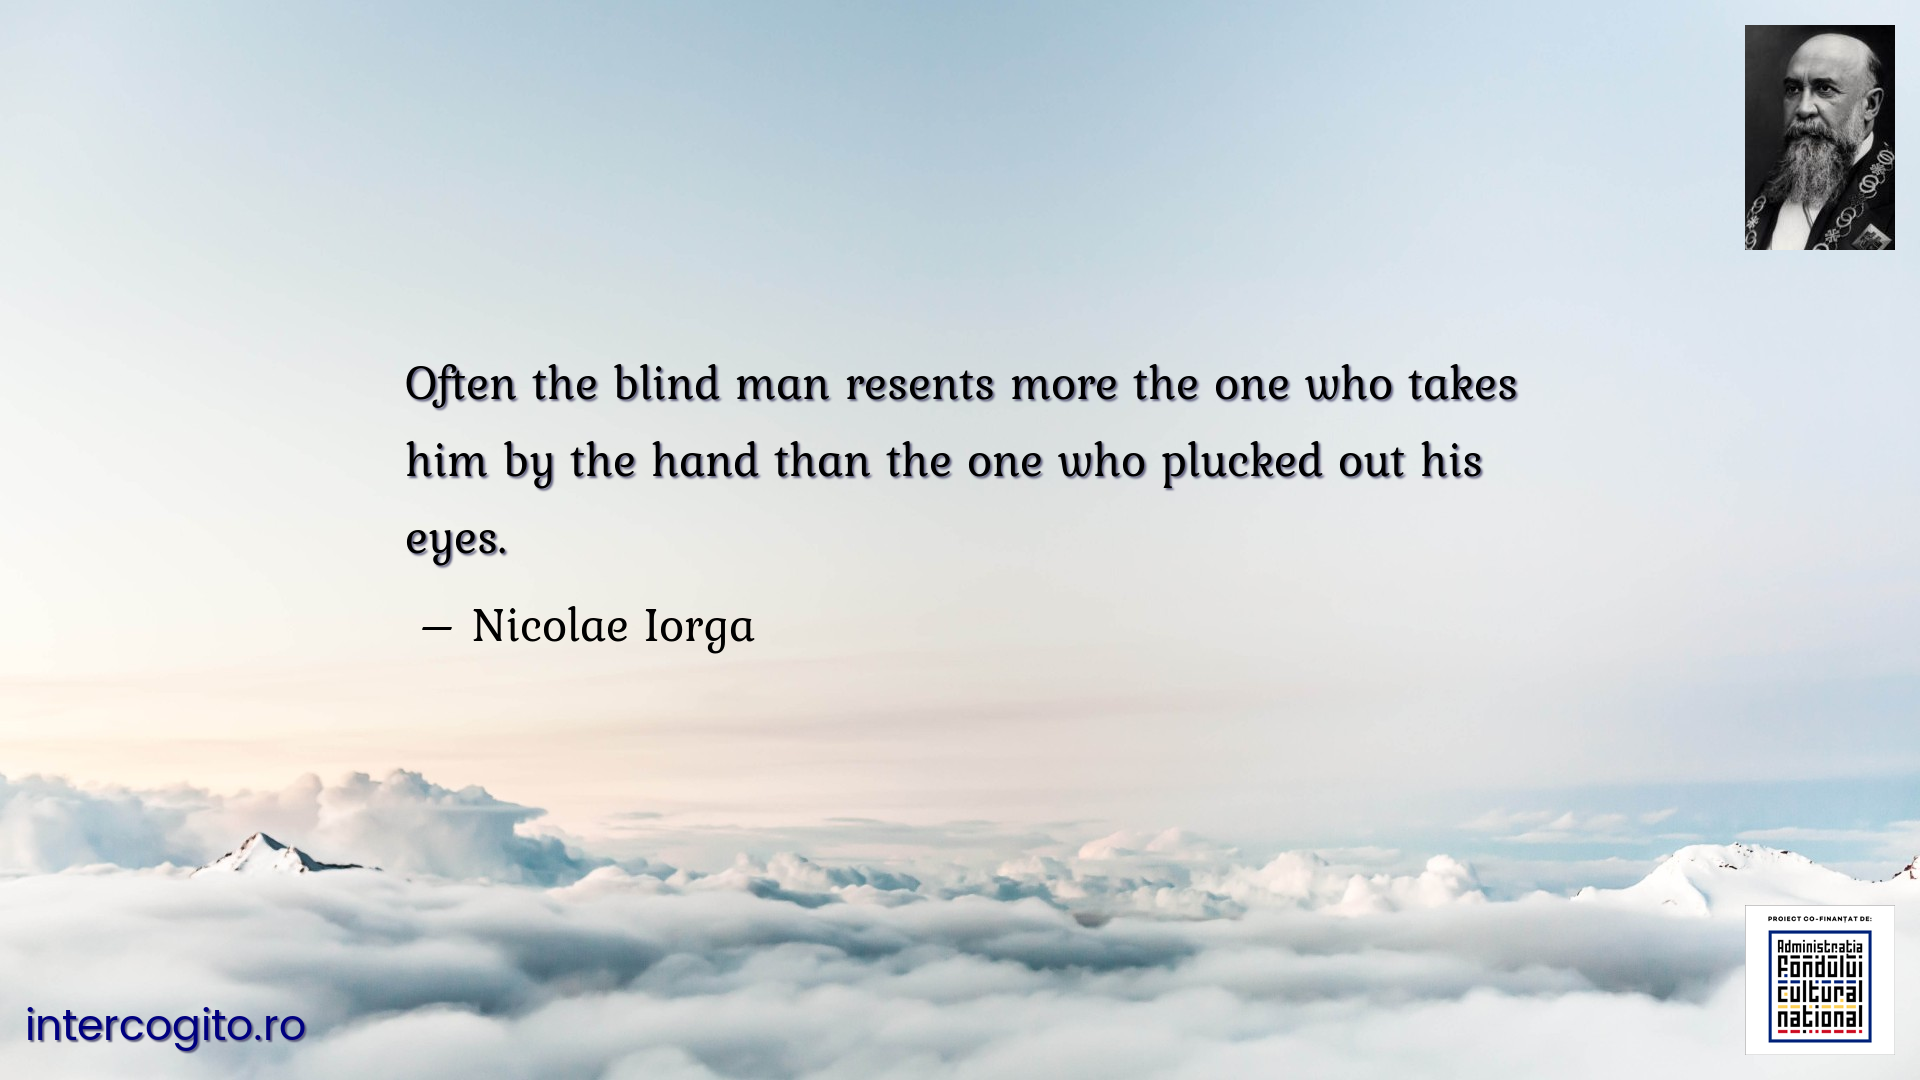 Often the blind man resents more the one who takes him by the hand than the one who plucked out his eyes.